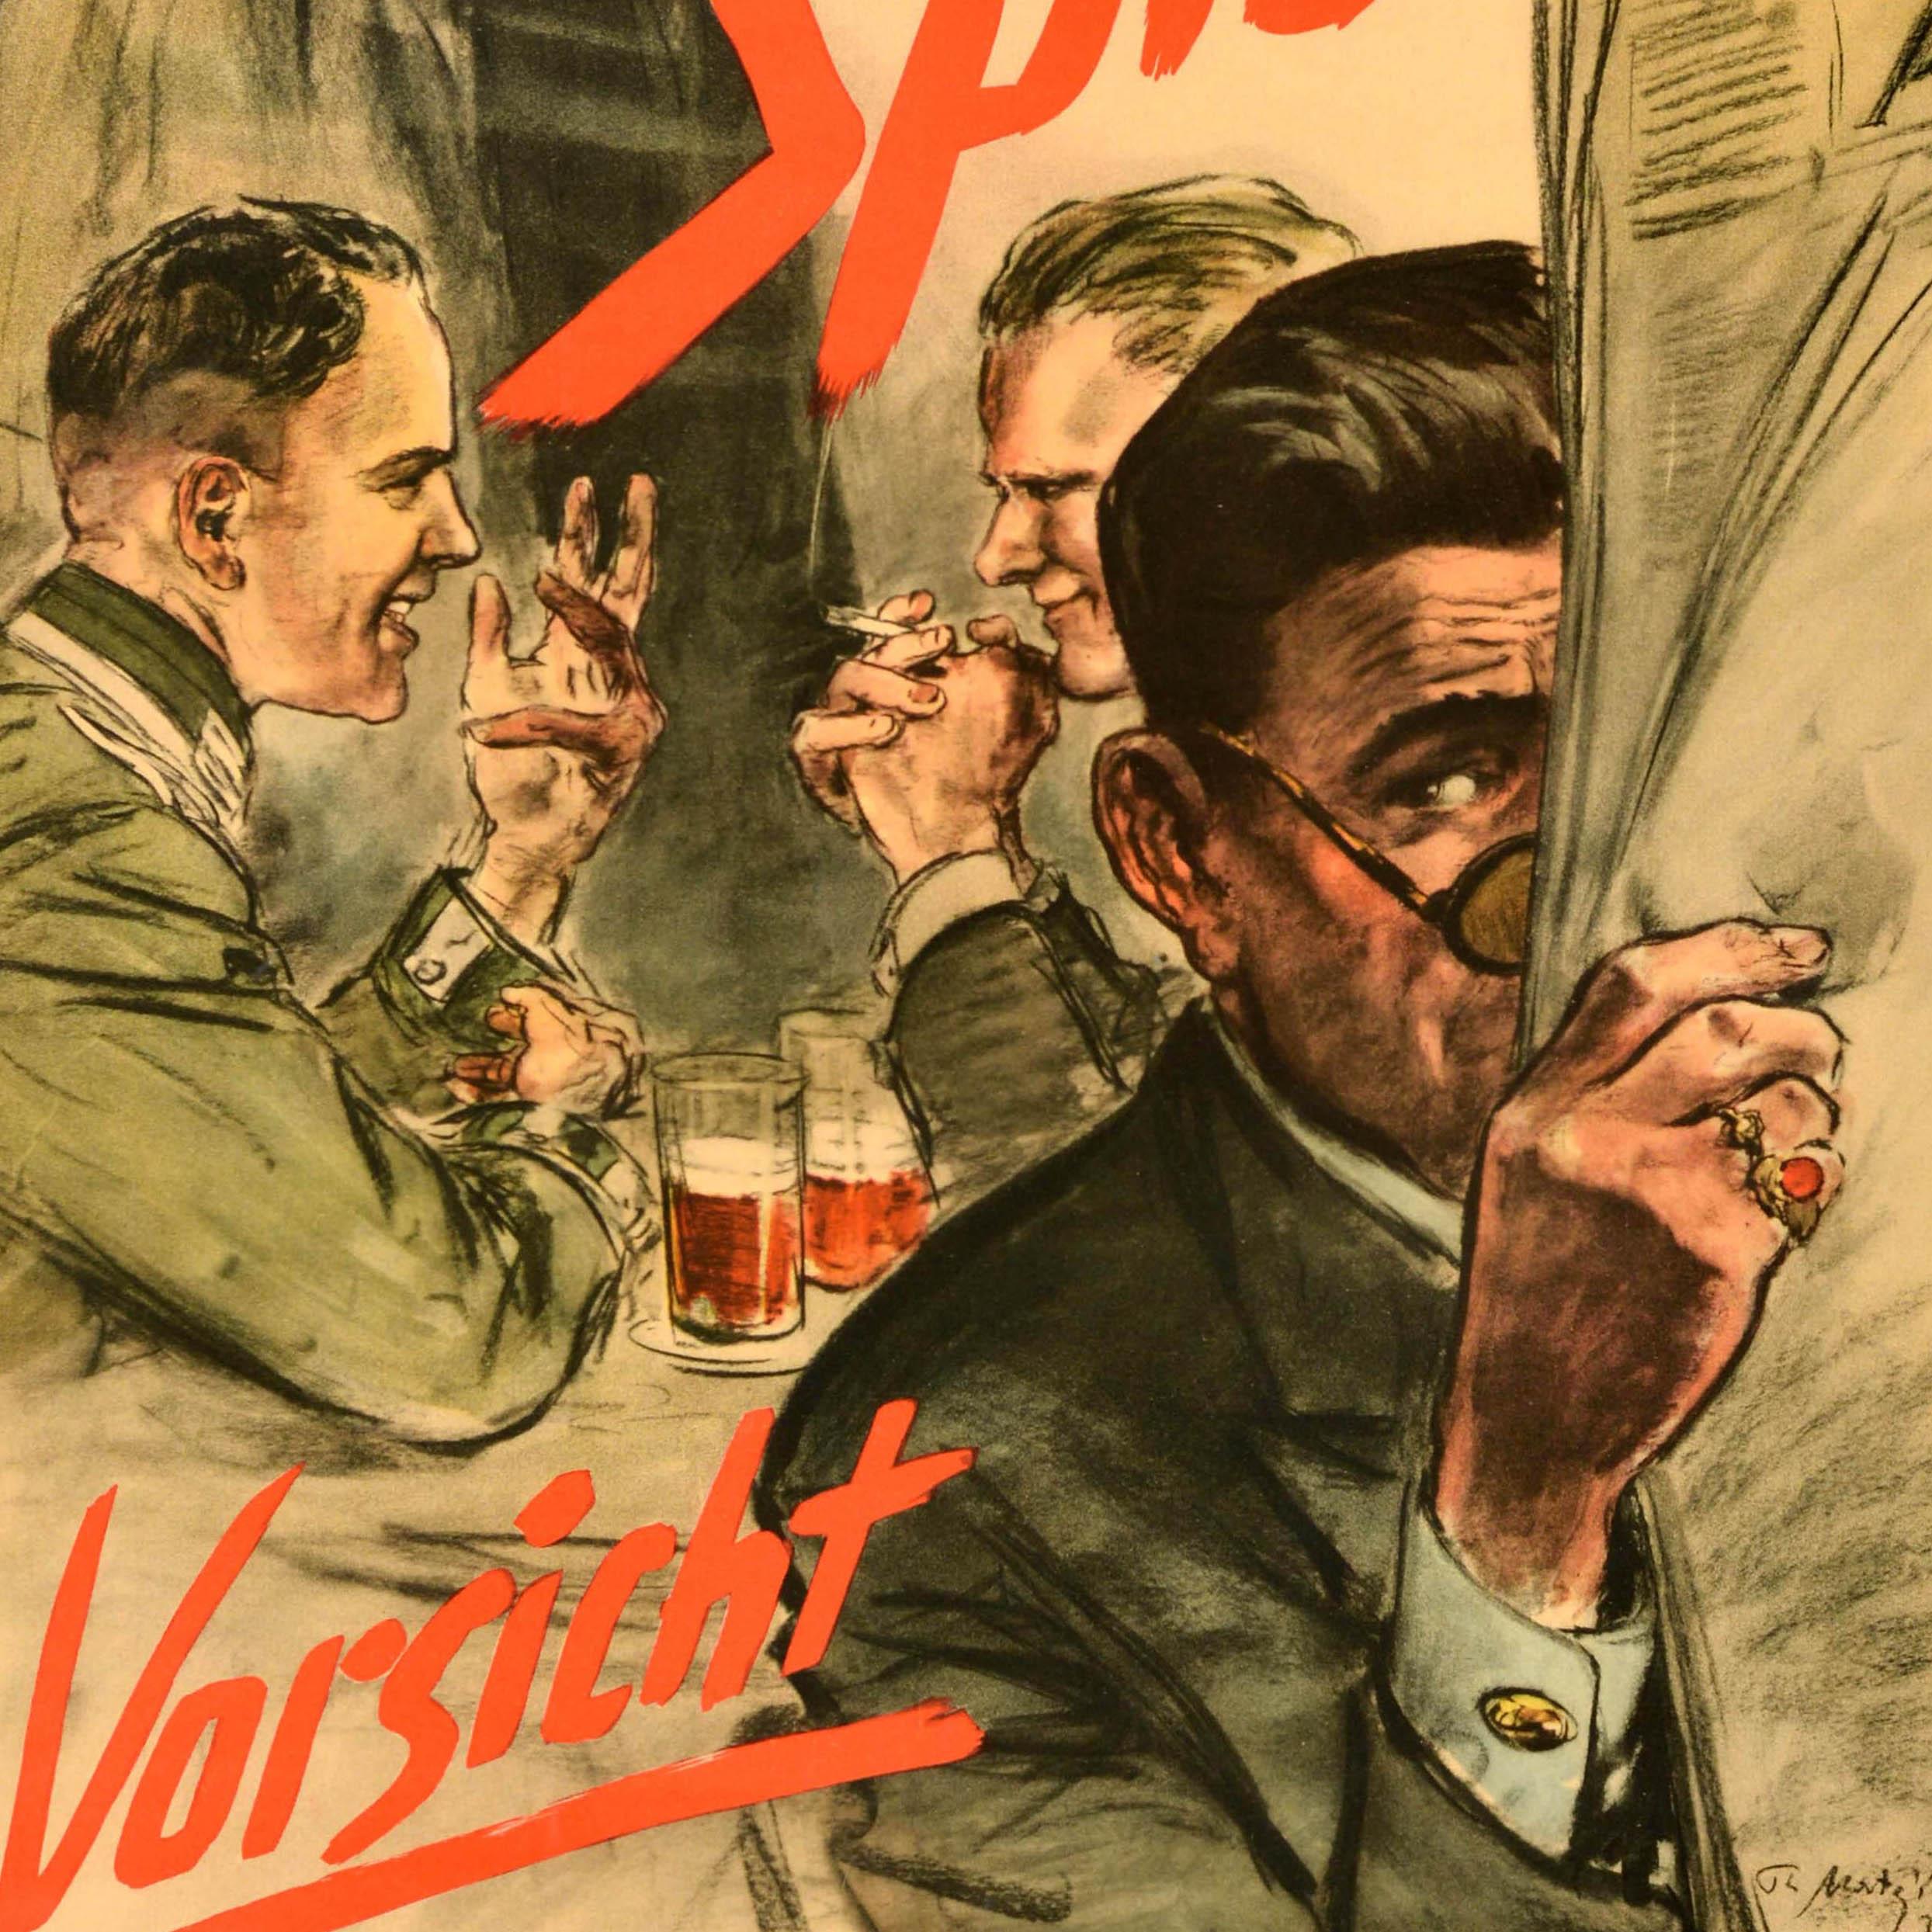 Original vintage propaganda poster - Beware of spies be careful when talking! / Achtung Spione Vorsicht bei Gesprachen! - featuring an illustration of two soldiers talking over a beer with a man in the foreground listening whilst pretending to read